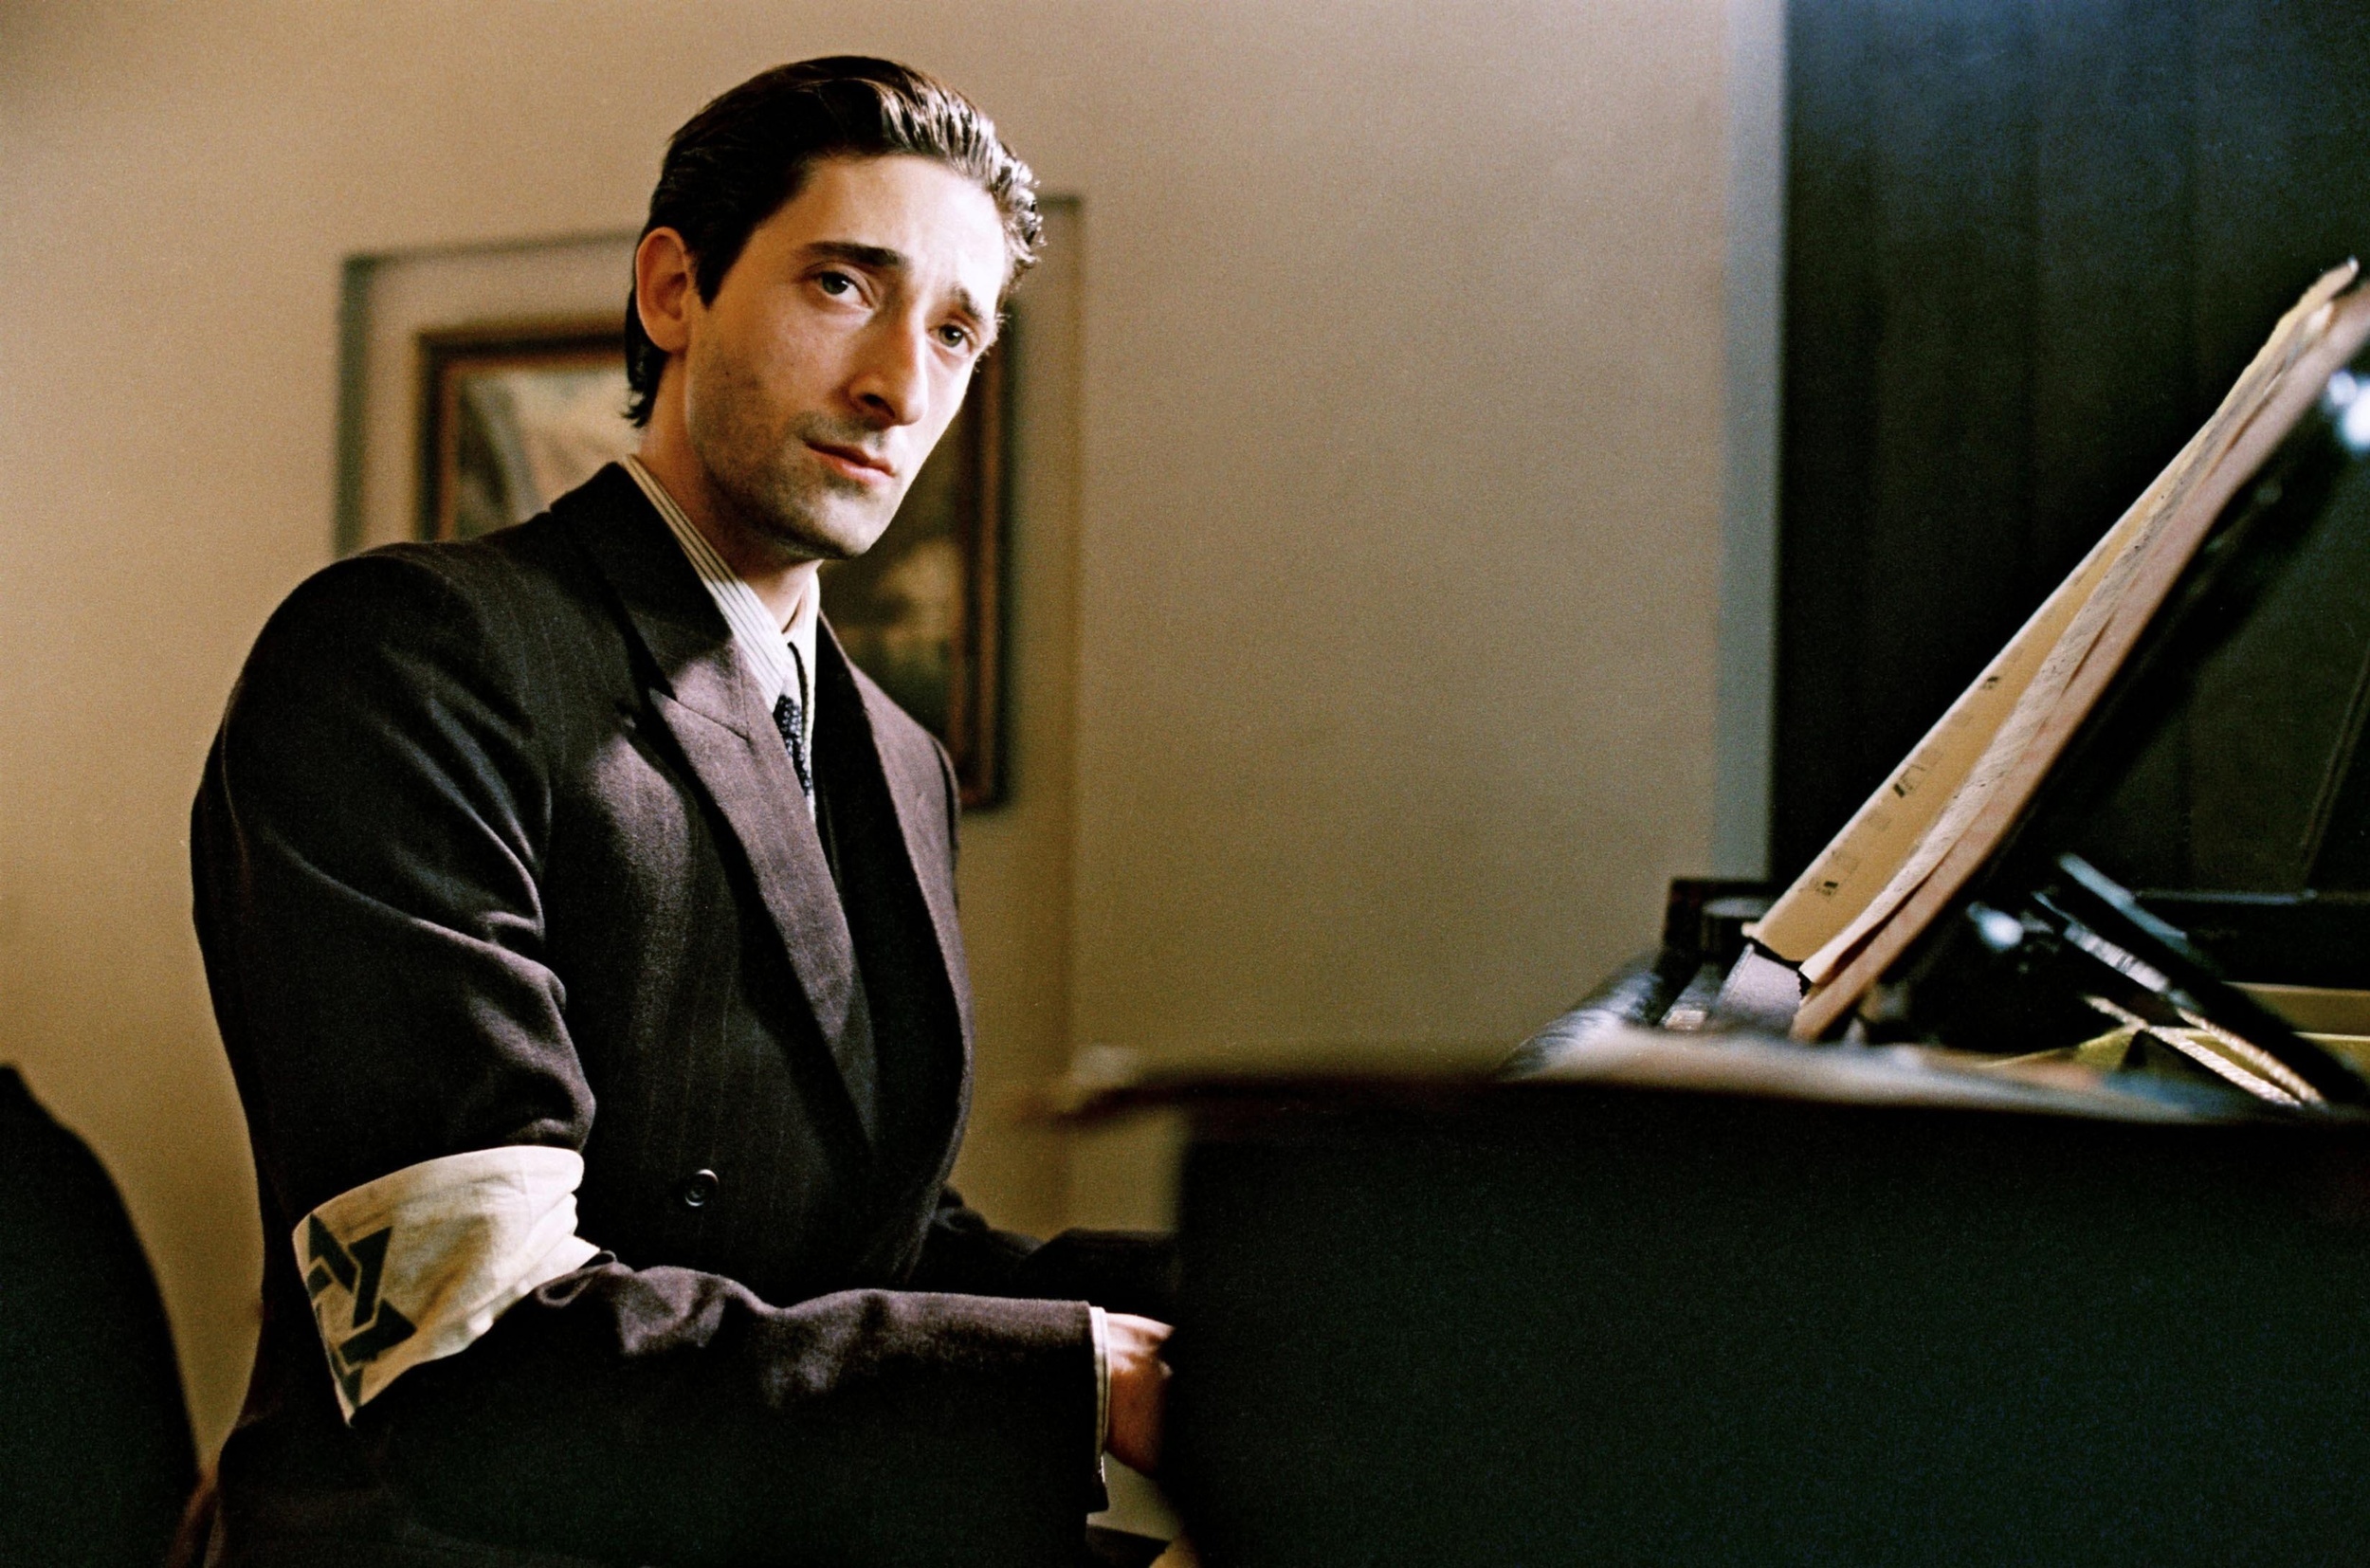 <p>Remember what we said about there being plenty of real war material for movies? <em>The Pianist</em> is about Władysław Szpilman, a Polish-Jewish pianist and composer who survived the Holocaust. The award-winning film was lauded for its masterful performances, particularly by Adrien Brody, who played Szpilman. </p><p><a href='https://www.msn.com/en-us/community/channel/vid-cj9pqbr0vn9in2b6ddcd8sfgpfq6x6utp44fssrv6mc2gtybw0us'>Follow us on MSN to see more of our exclusive entertainment content.</a></p>